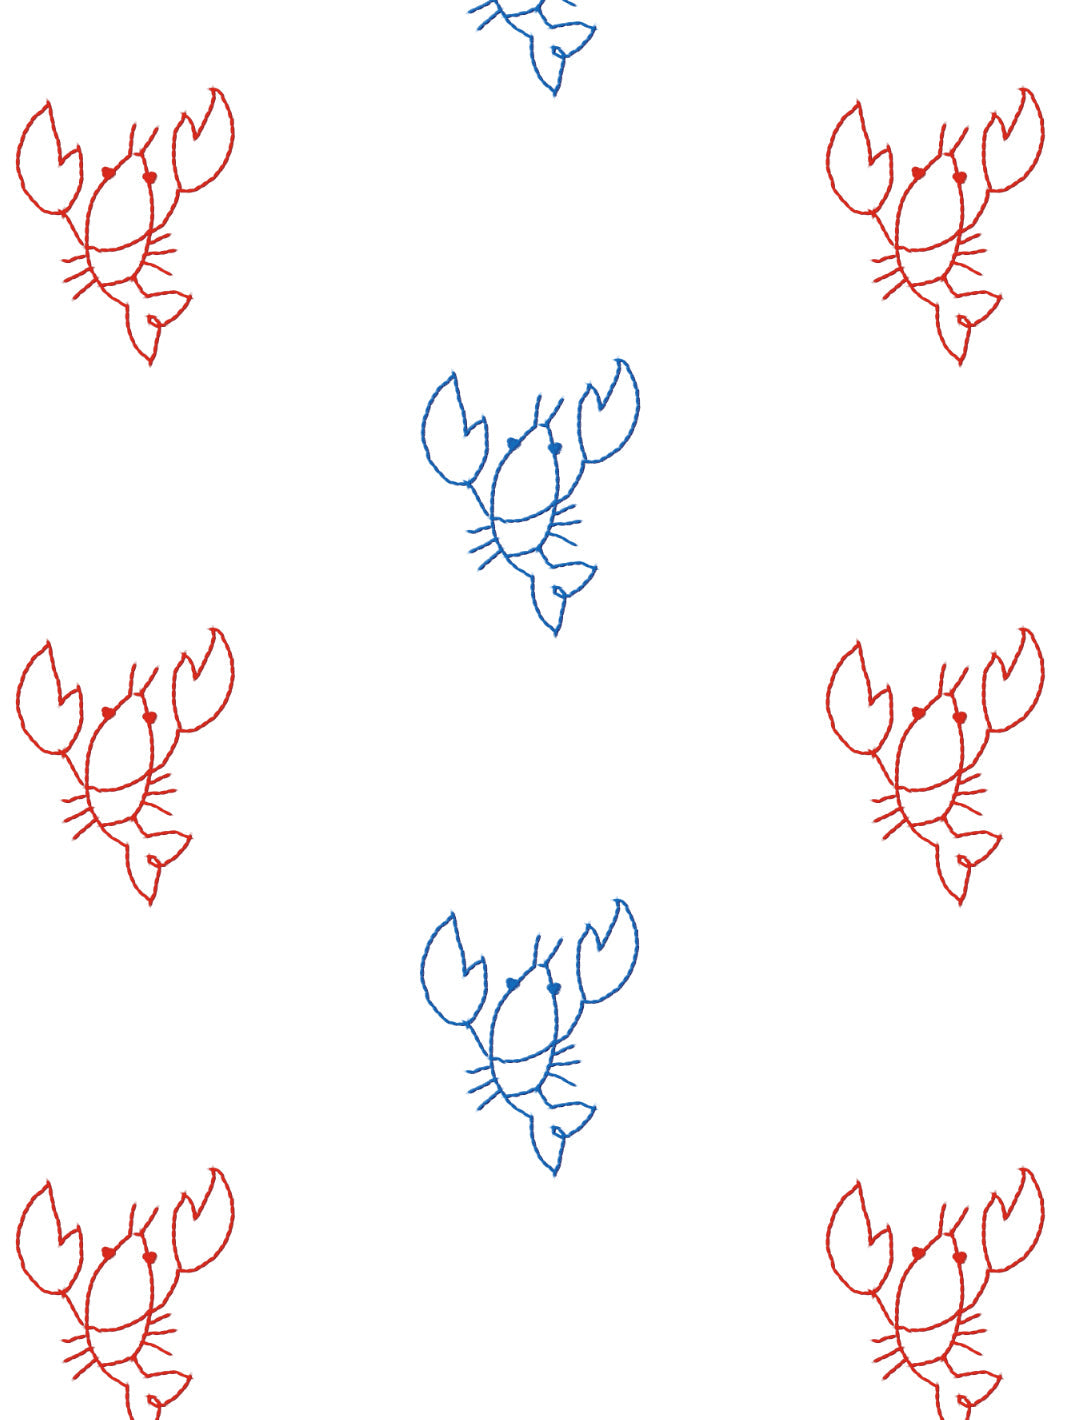 'Lobsters' Wallpaper by Lingua Franca - Blue + Red